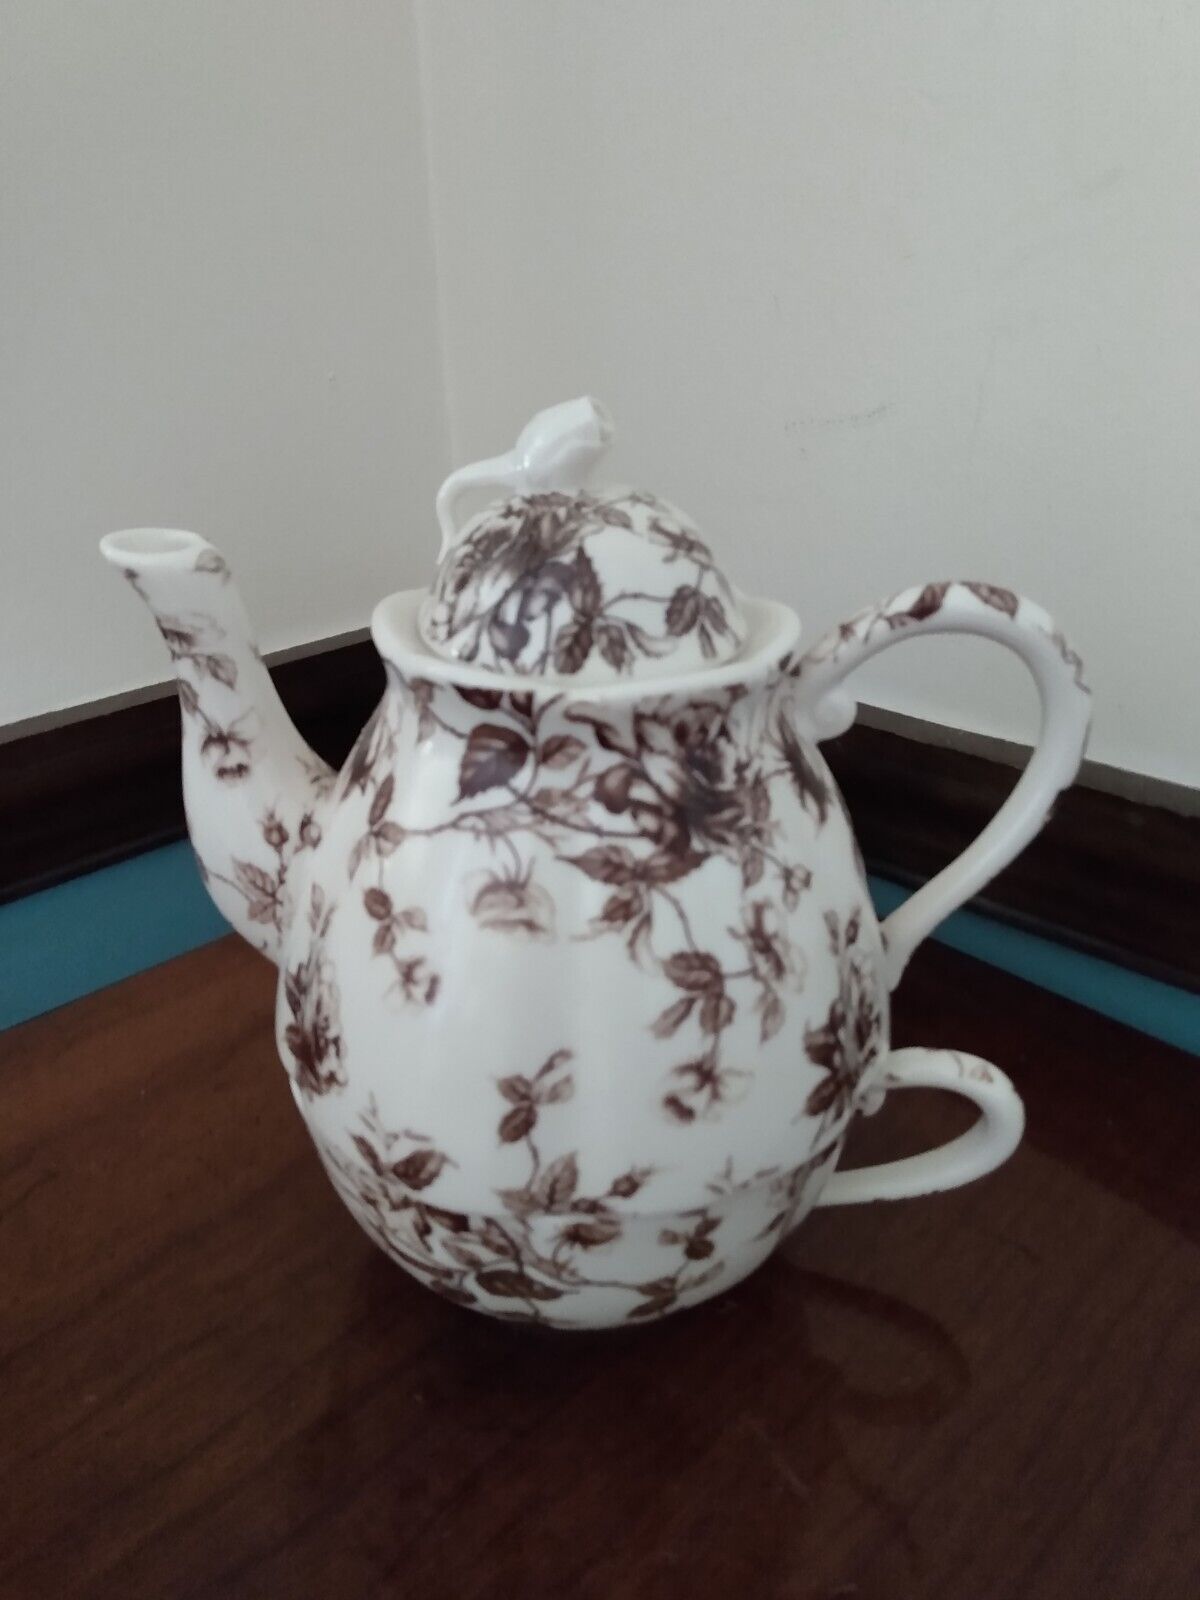 3 Pc Brown Toile Peppertree Tabletop Teapot Coffee Pot For One With Cup Mug Lid